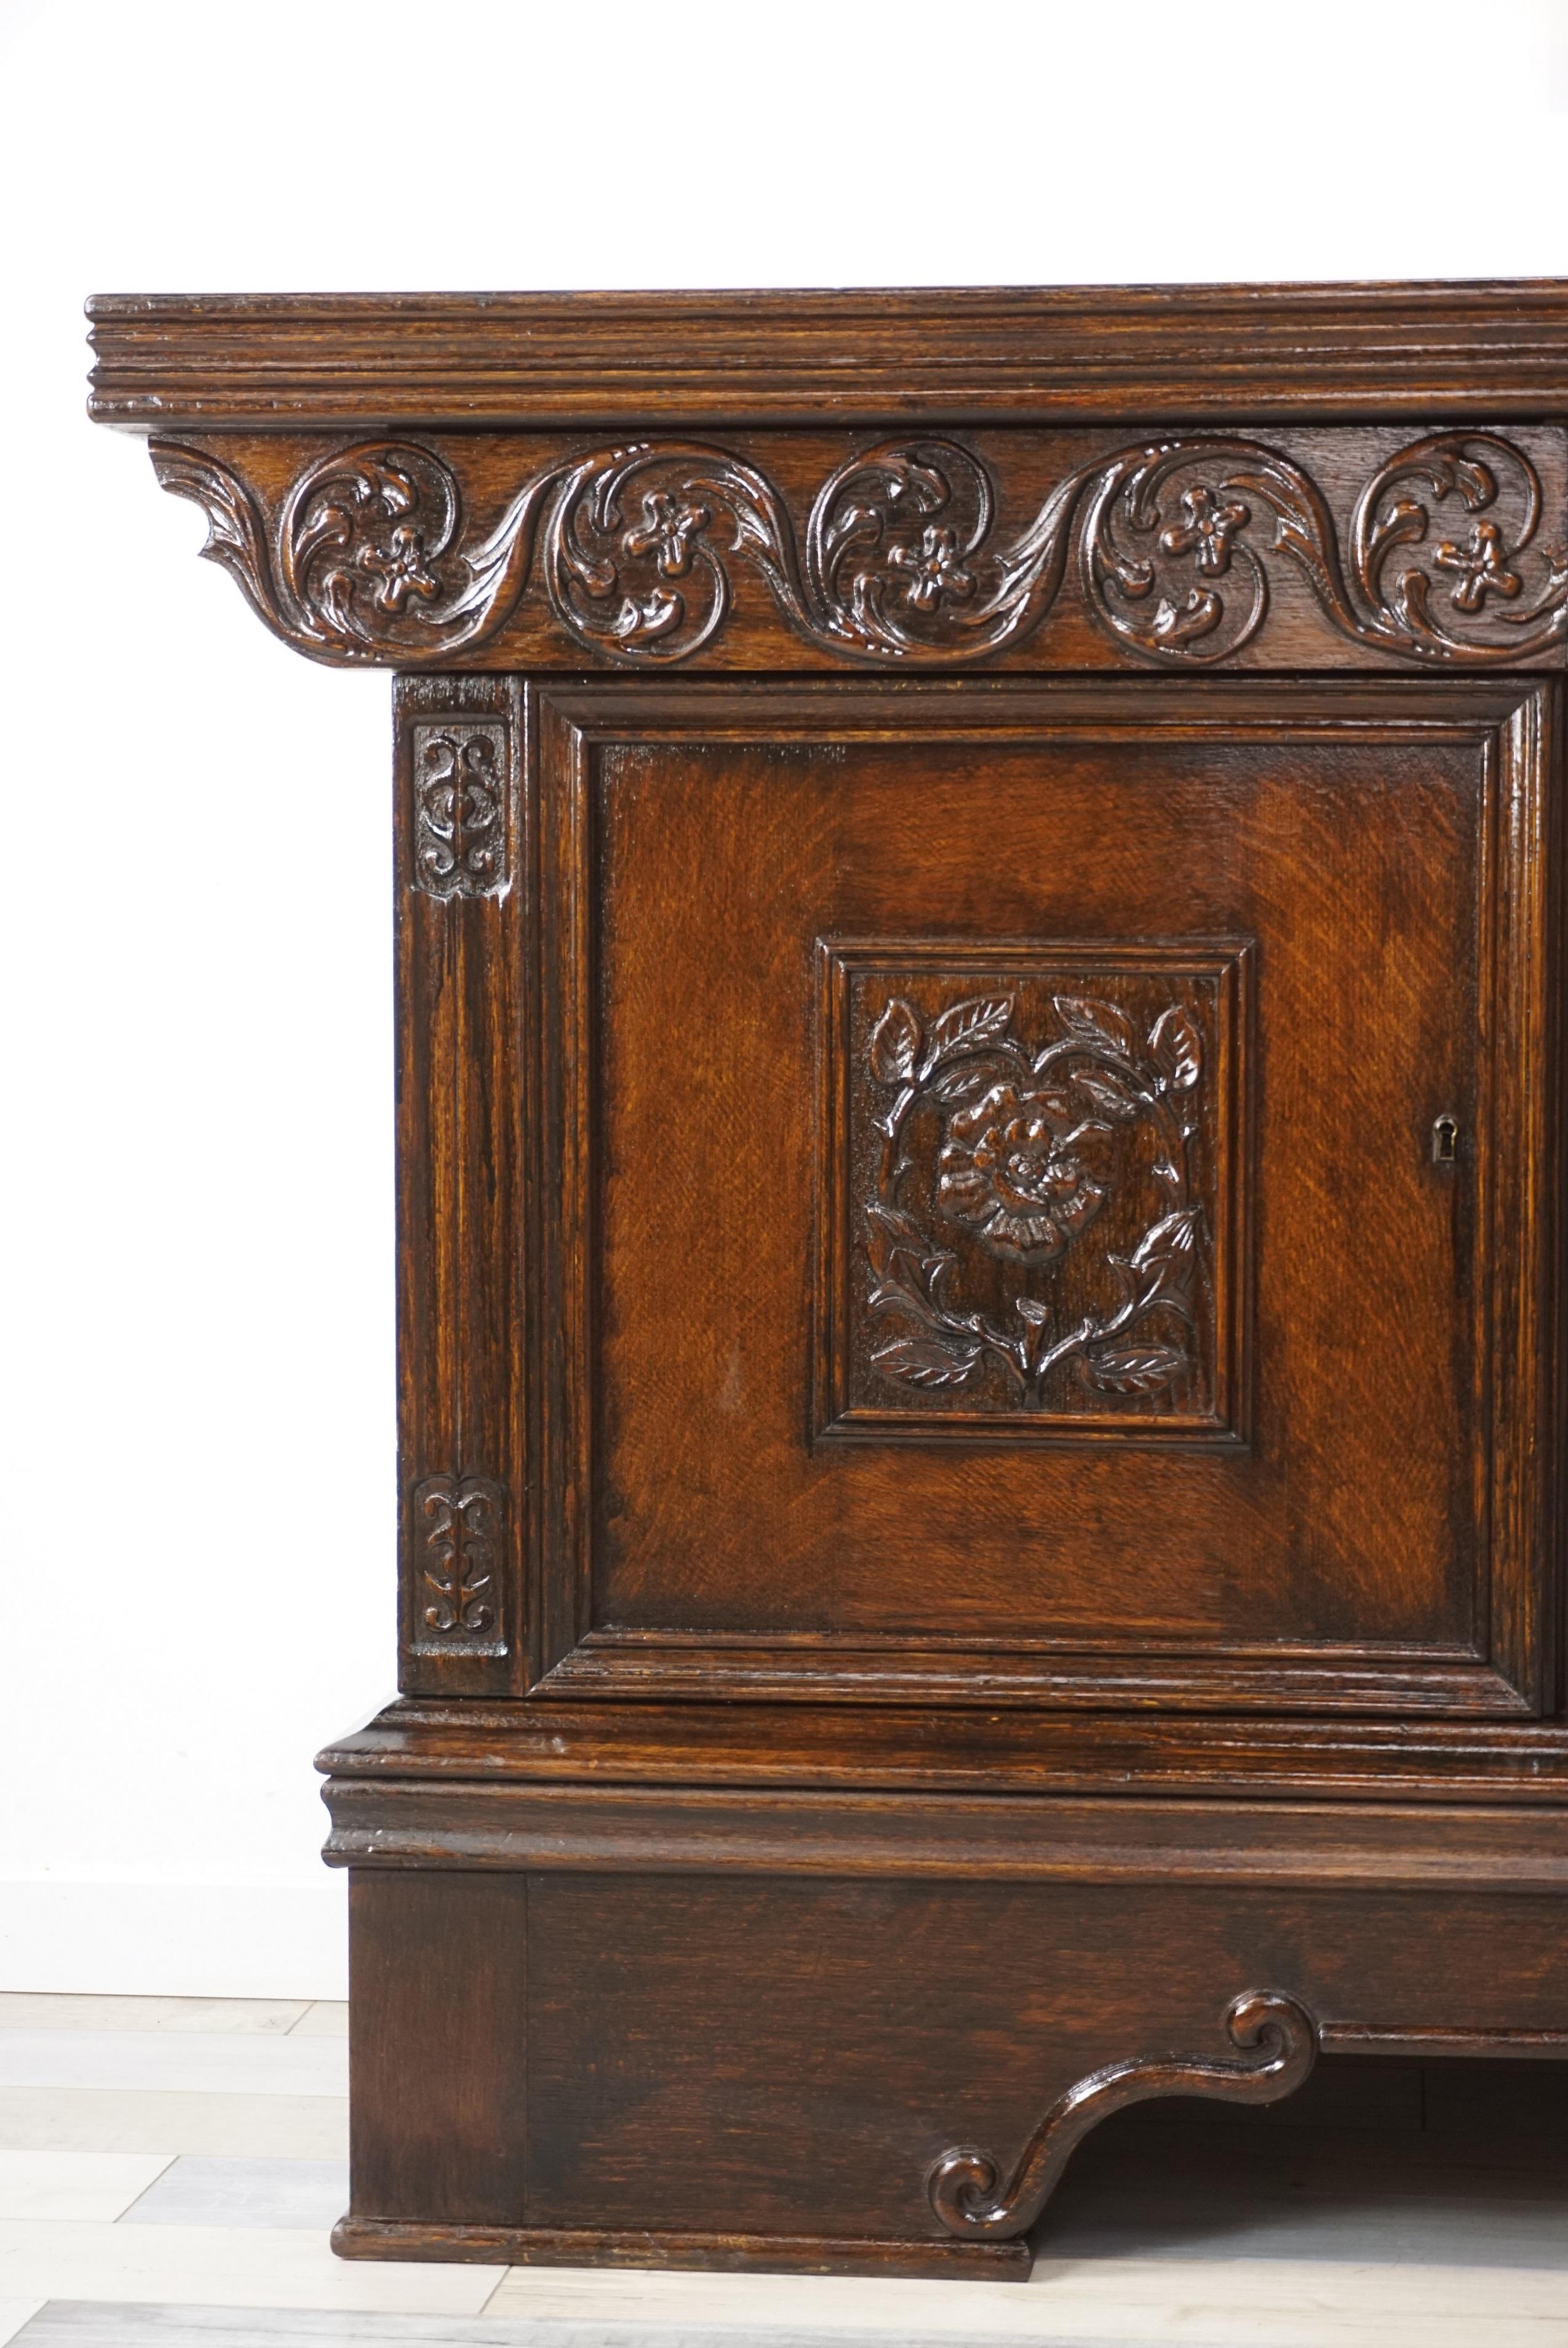 19th Century Antique Sideboard or Oak Wooden Buffet, 19th-Early 20th Century For Sale